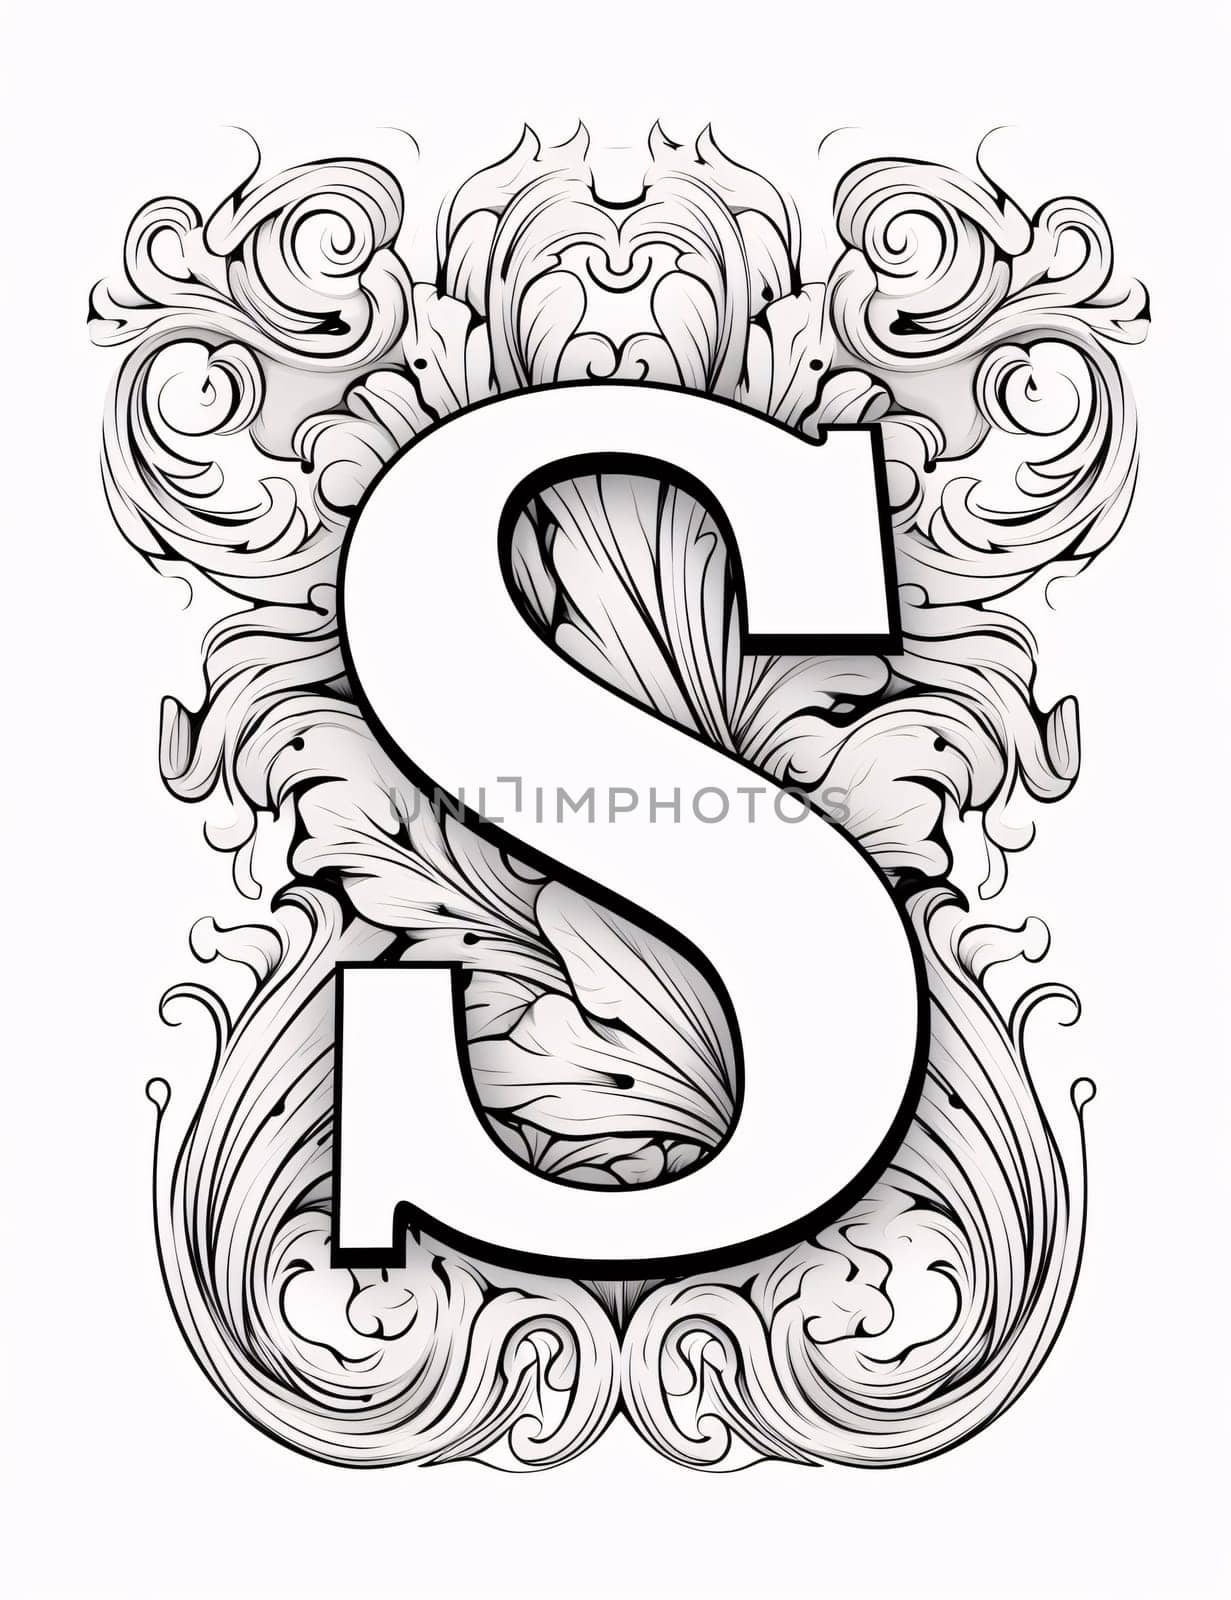 Graphic alphabet letters: Vintage letter S in Victorian style. Hand drawn design elements.